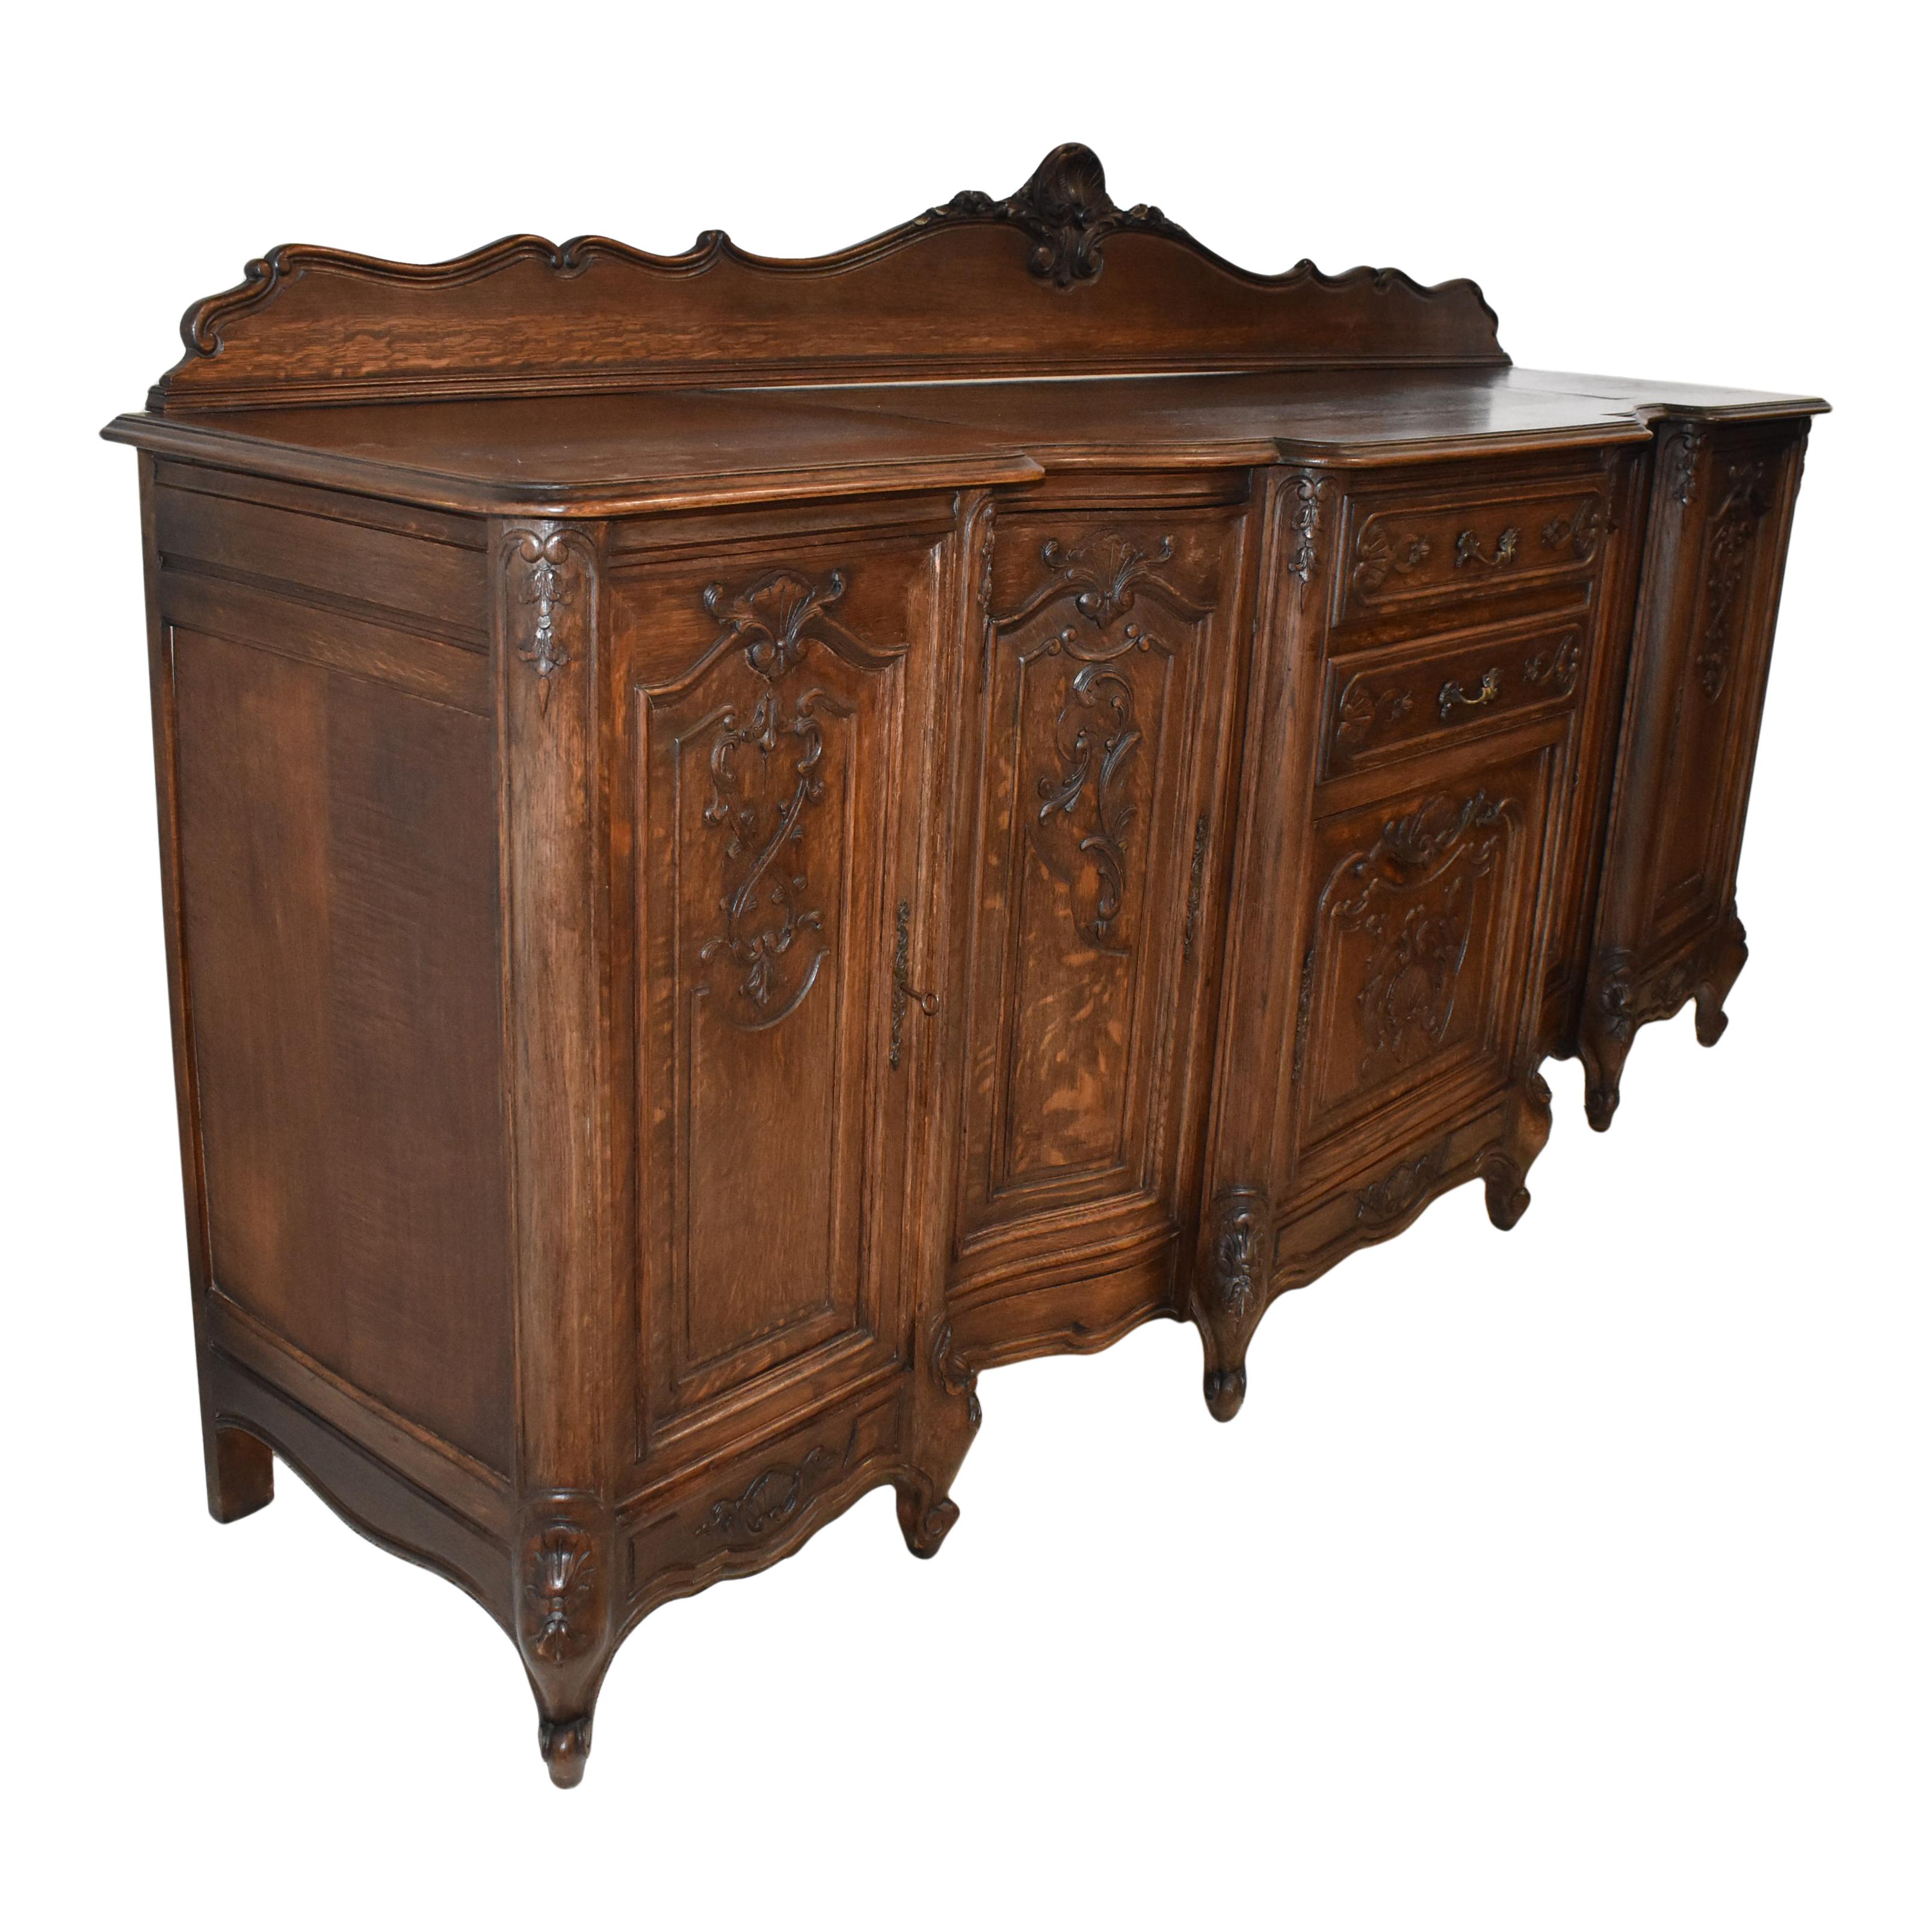 Crafted from solid European oak and finished with a medium stain that enhances the beauty of the wood's grain, this gorgeous sideboard from the early 20th century features carvings of shells, acanthus leaves, flowers, and scrolled lines consistent